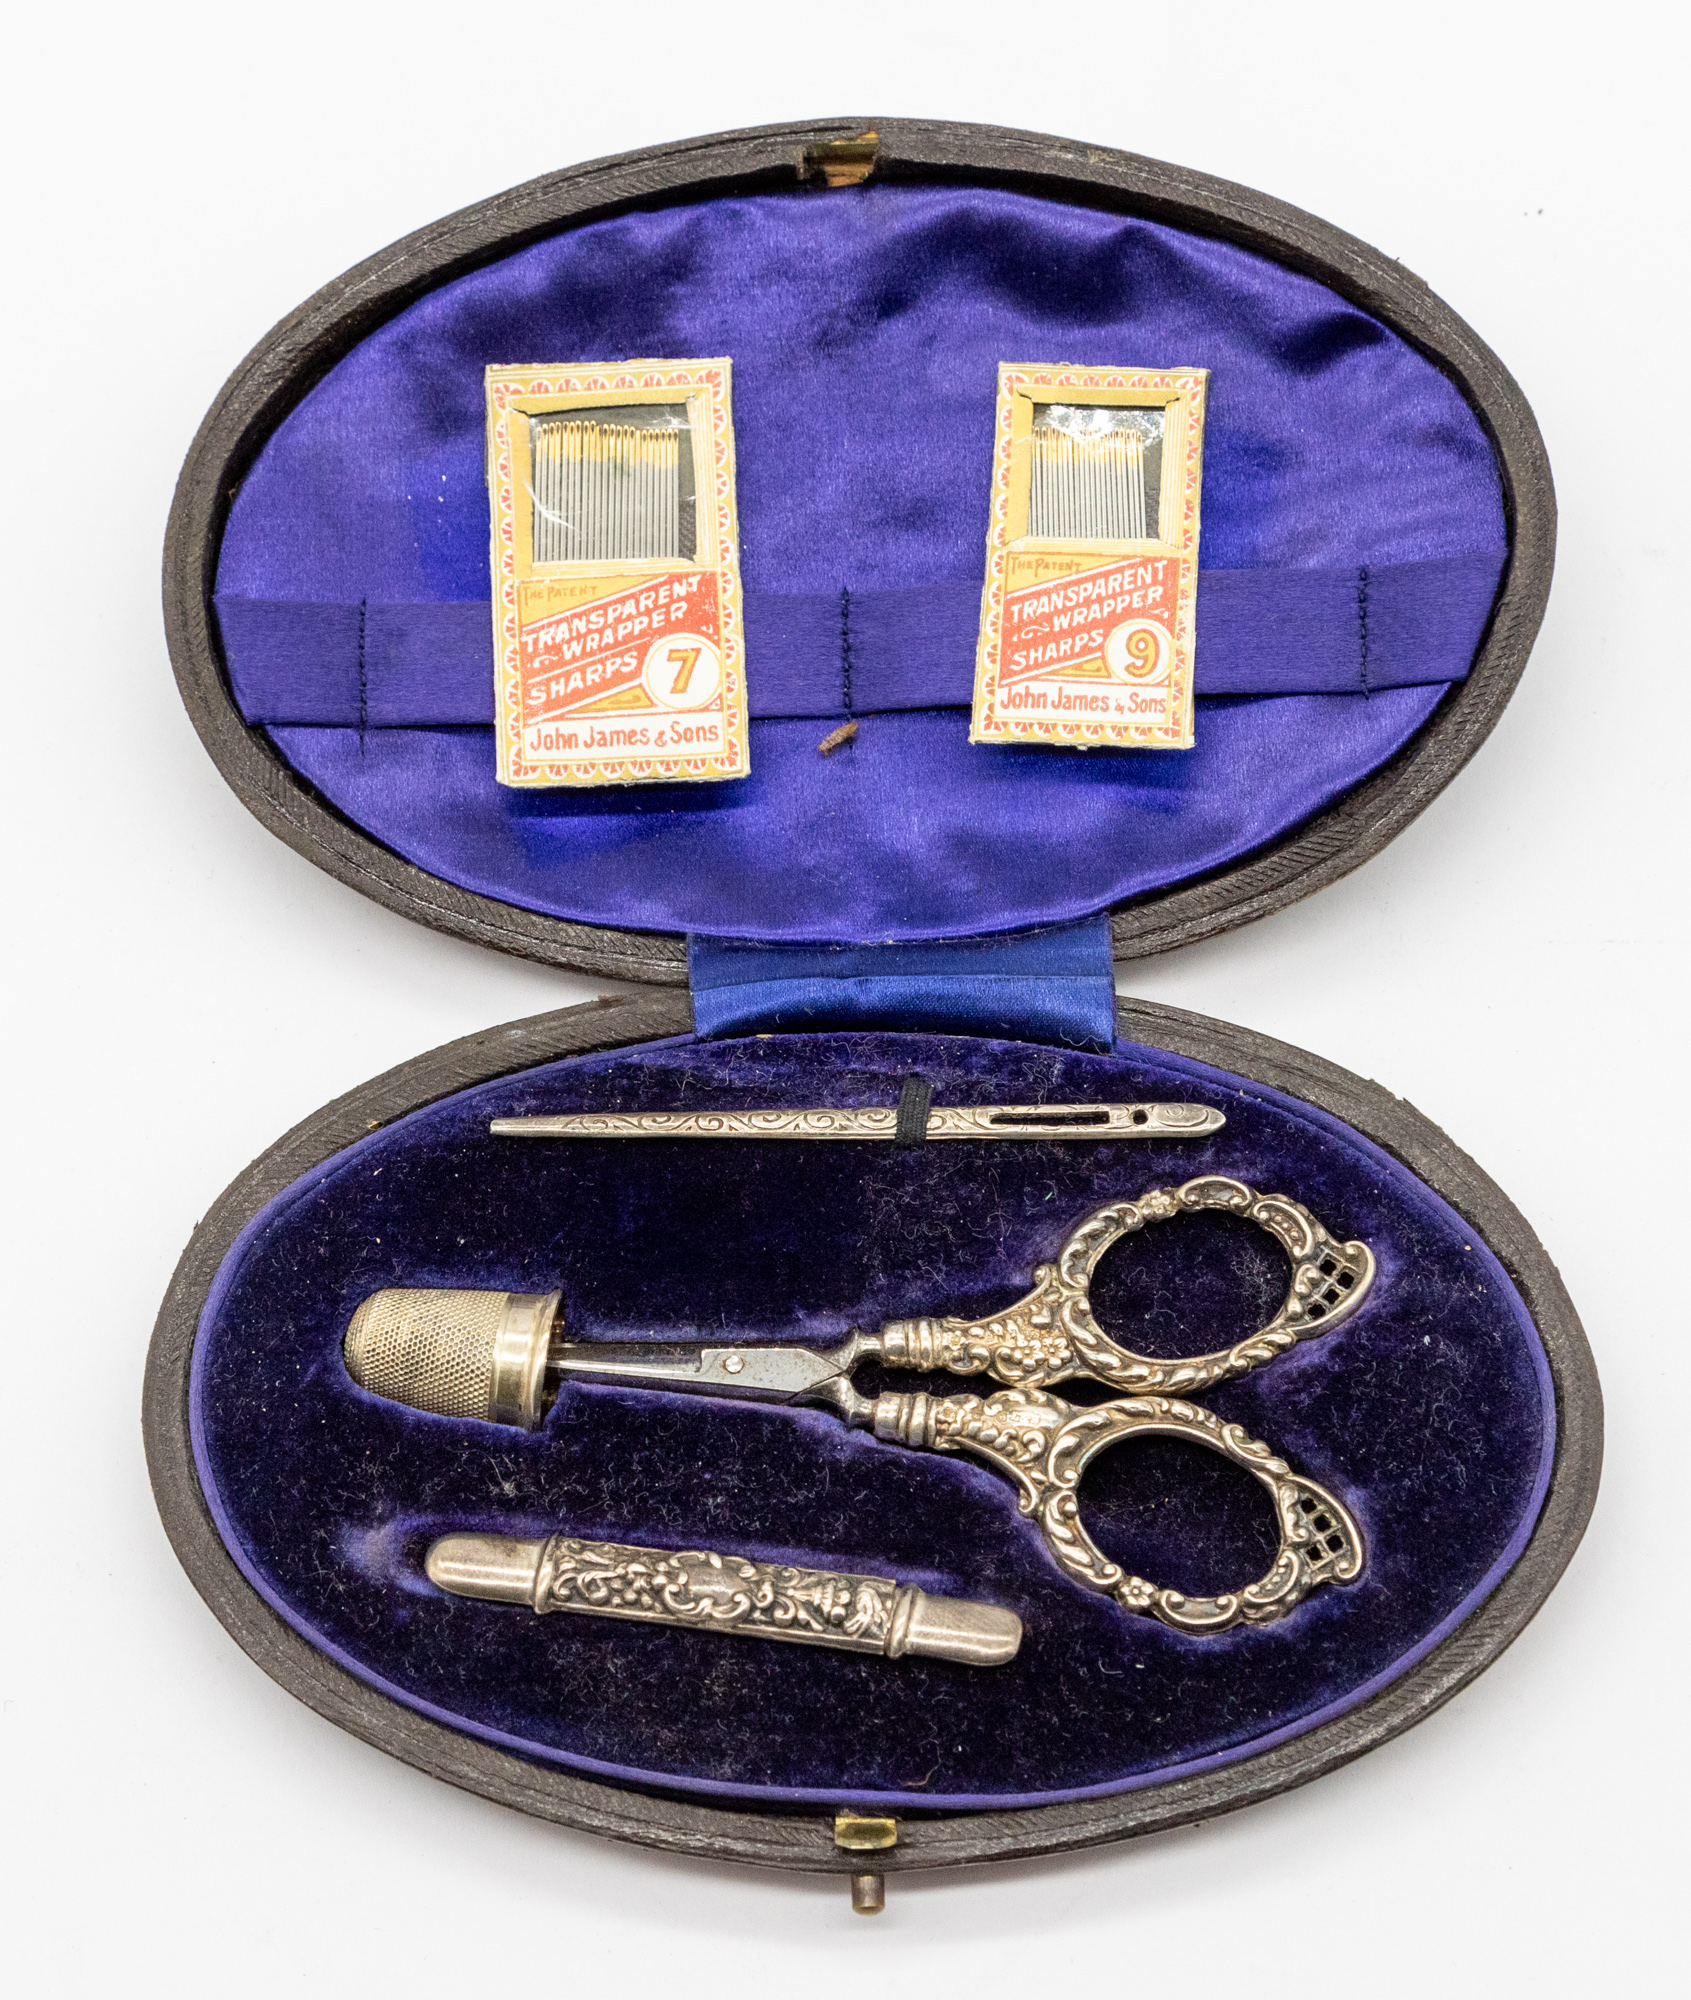 A cased late Victorian silver sewing set consisting of threading needle, scissors, thimble and